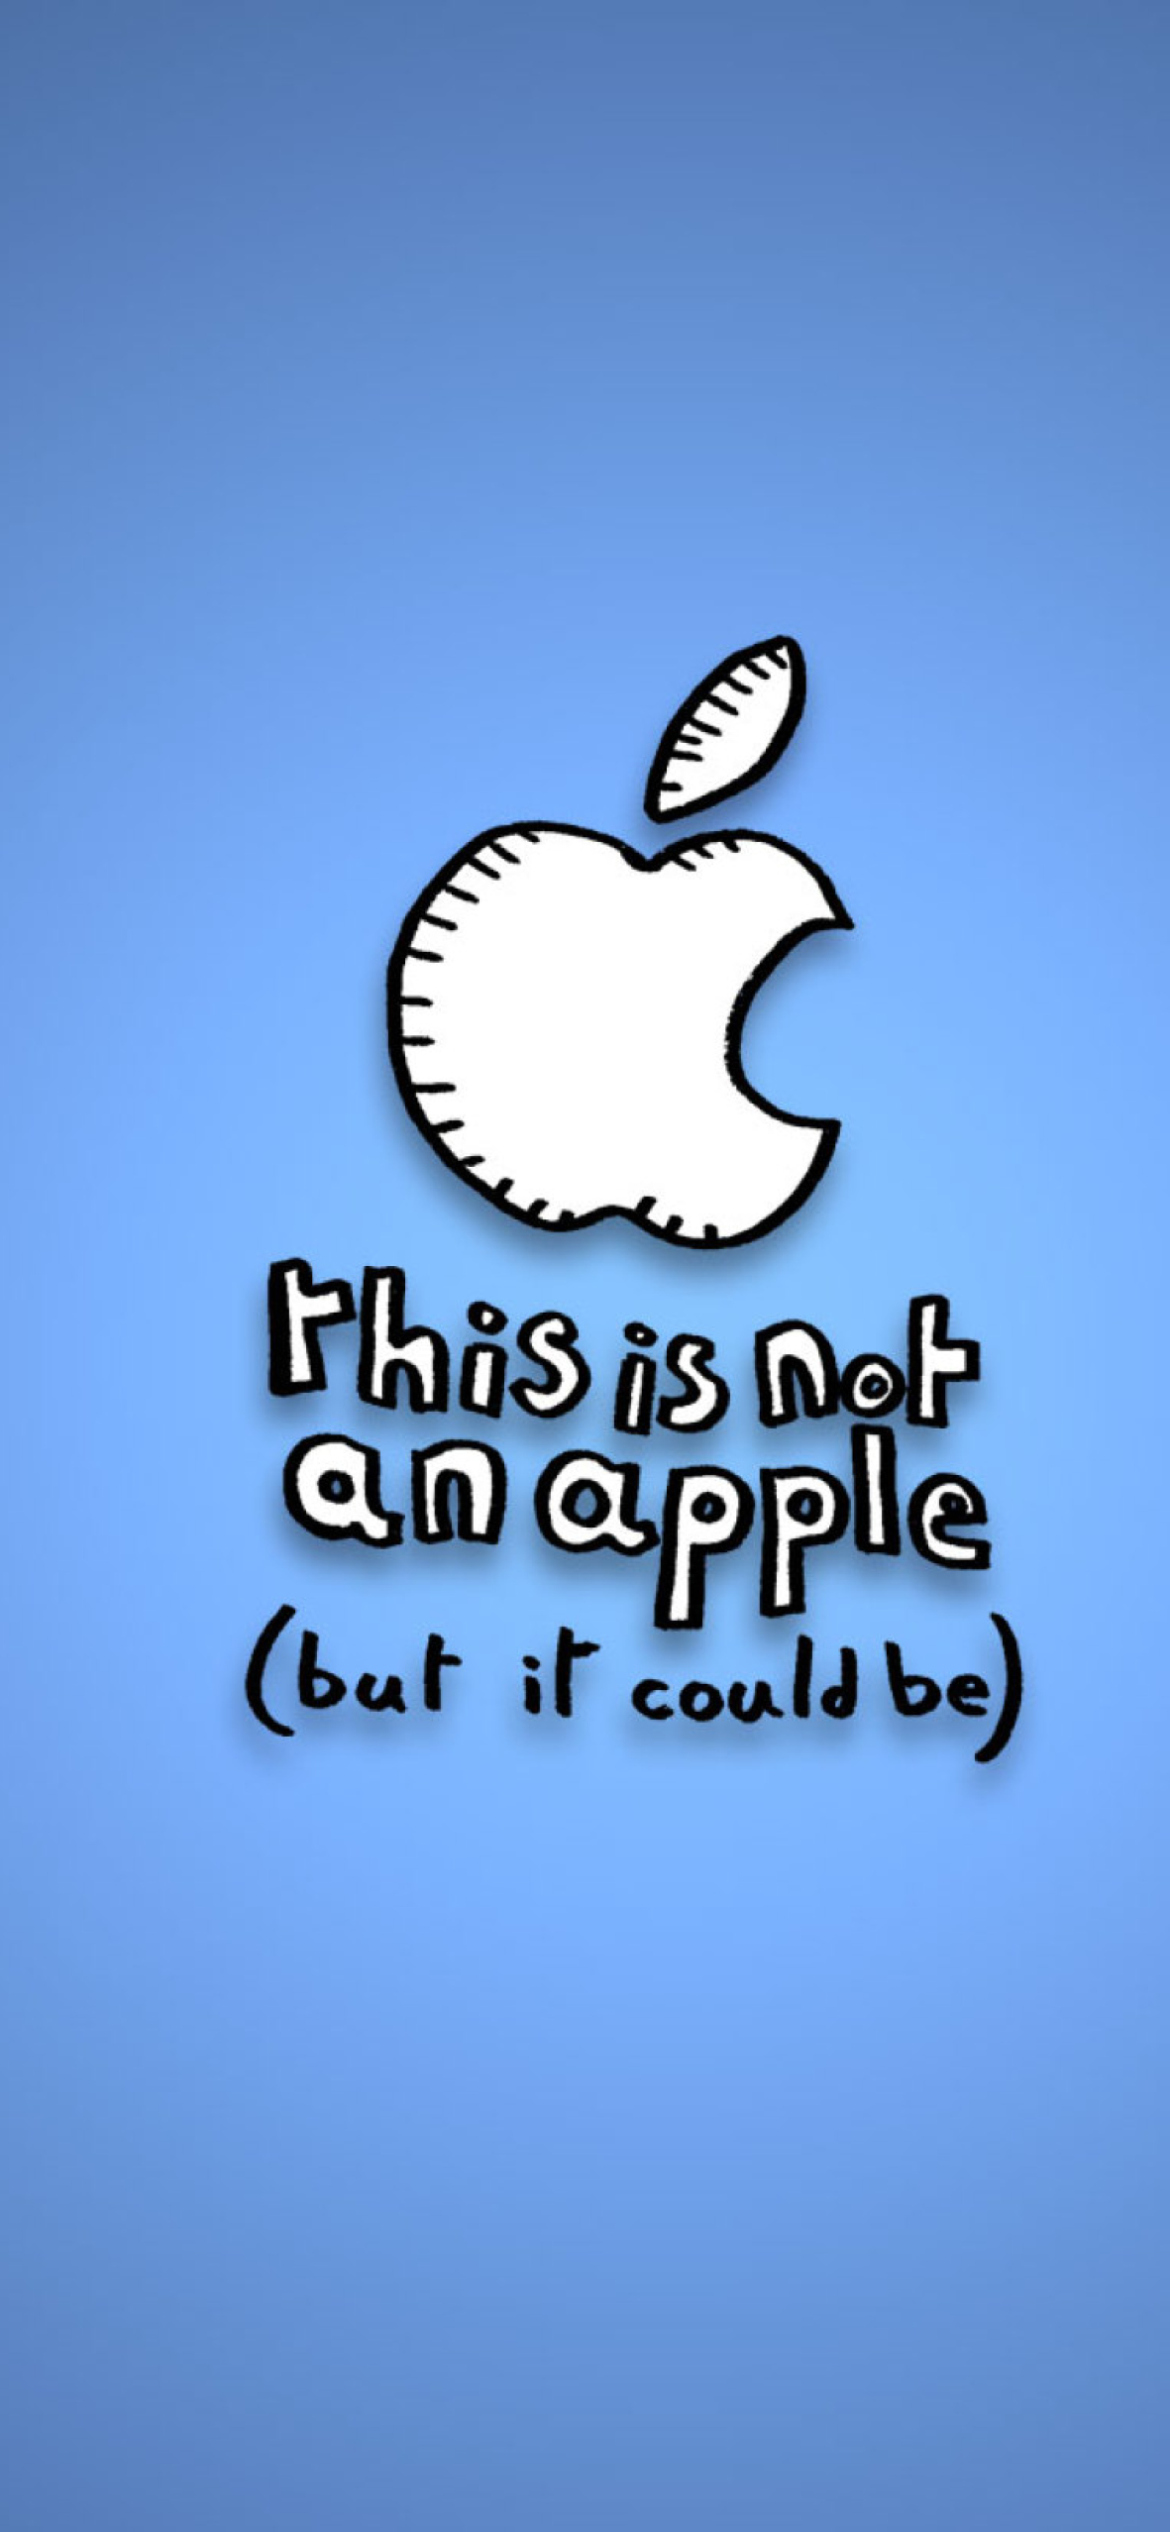 Обои This Is Not An Apple 1170x2532